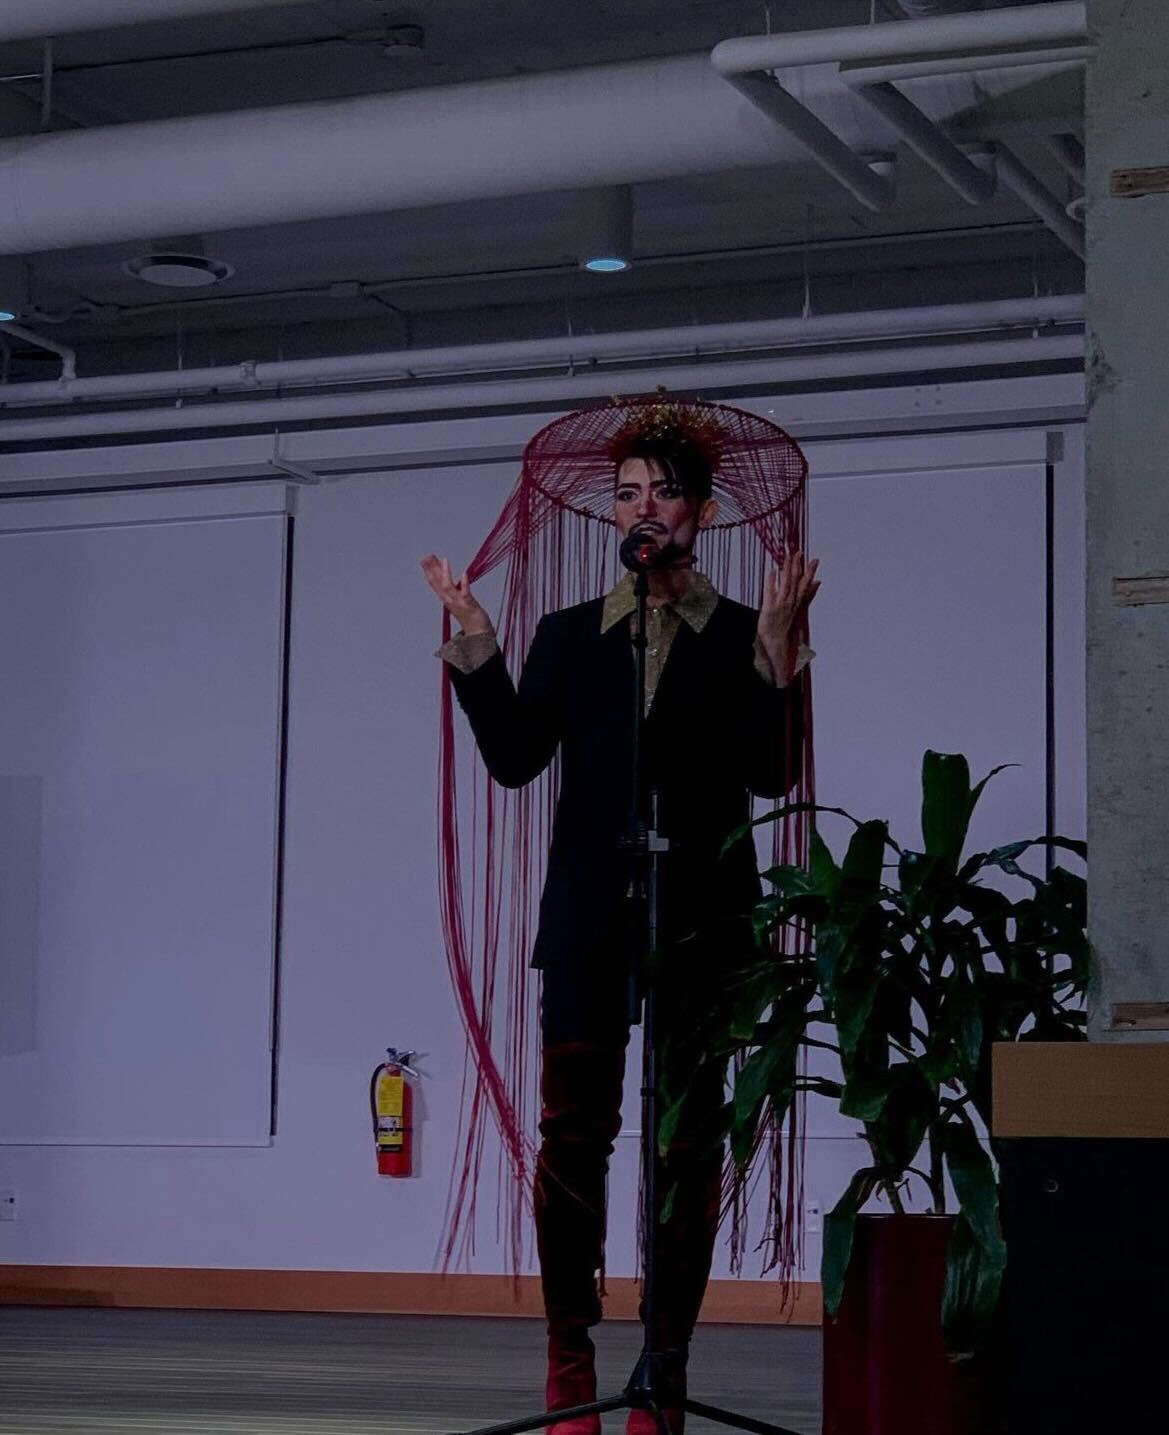 King Fisher performing a drag set, wearing bold makeup and a sharp collared shirt with a blazer. He is in front of a microphone sitting under a hanging string ornament.